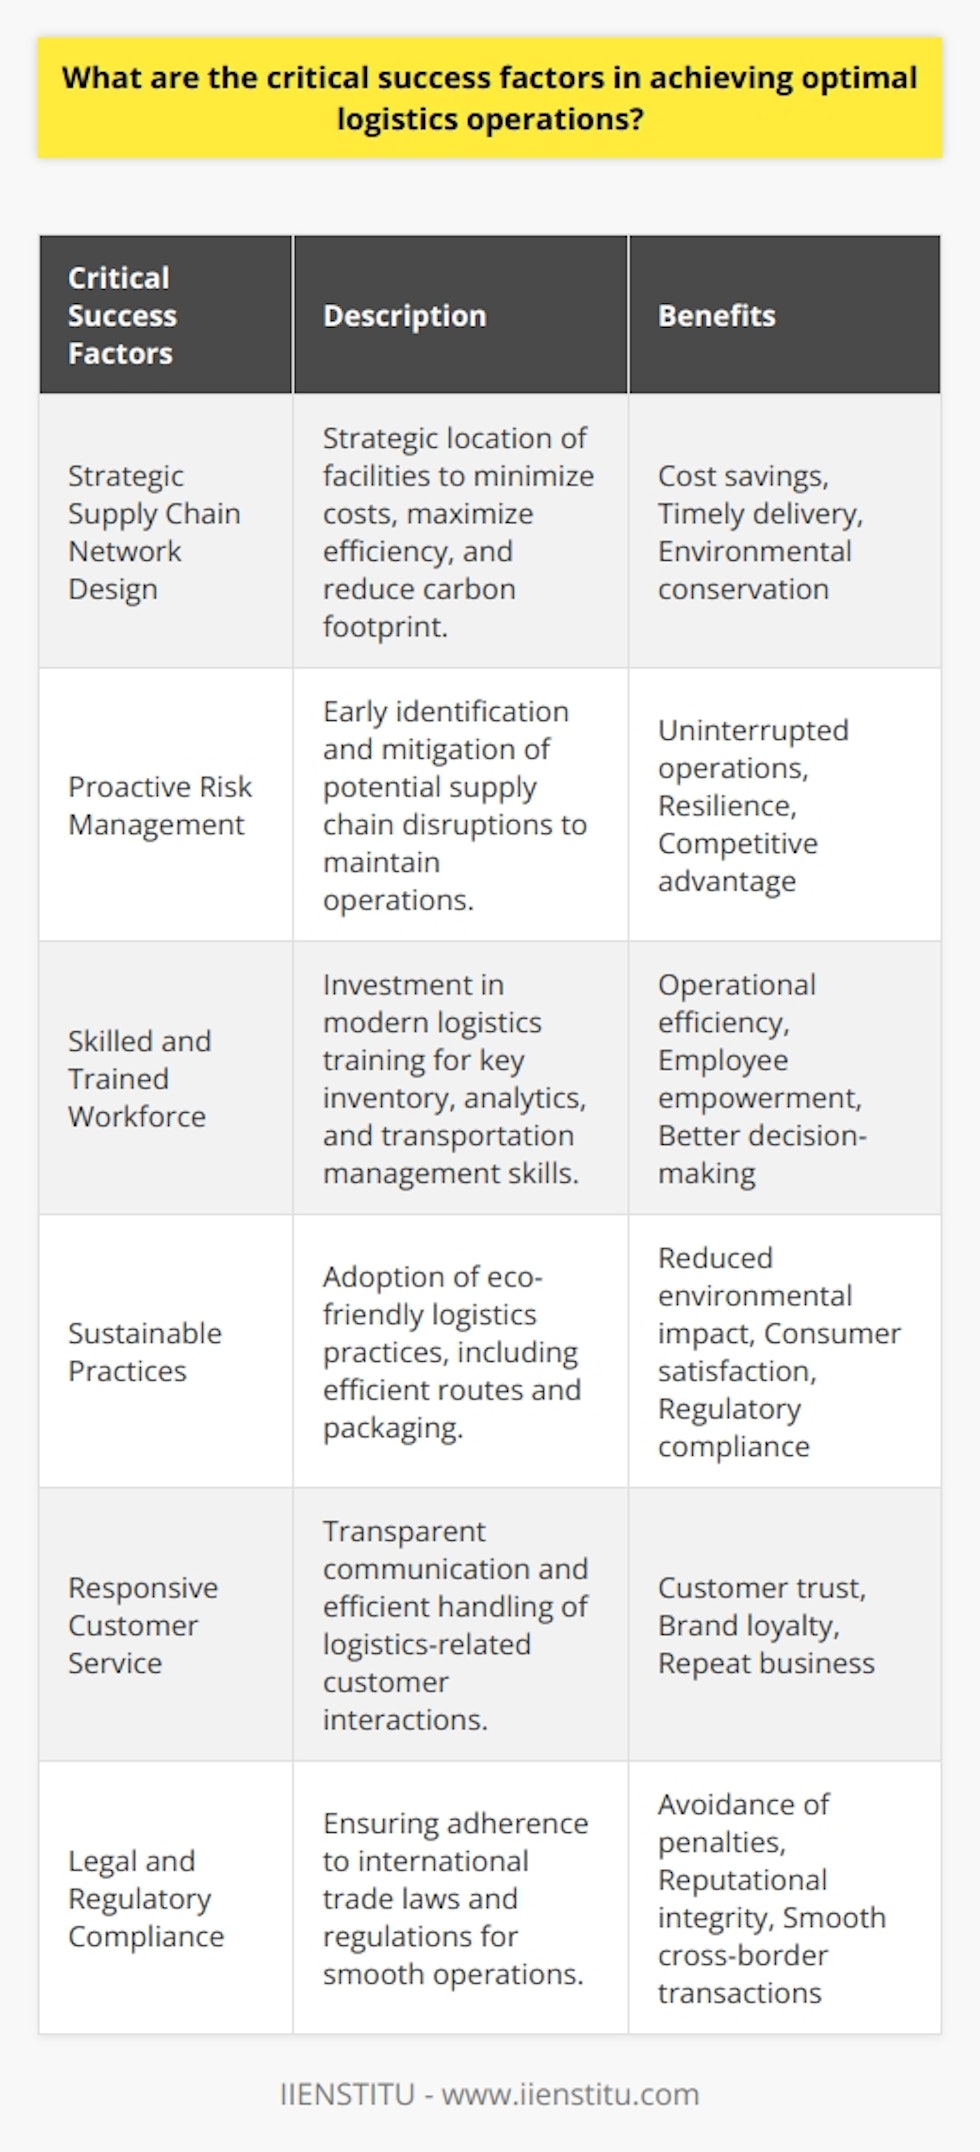 To achieve optimal logistics operations, organizations must focus on several critical success factors that ensure their supply chain is efficient, agile, and customer-centric. Here are the key elements that contribute to successful logistics operations:**Strategic Supply Chain Network Design**An optimal logistics operation begins with a well-designed supply chain network. This involves strategically locating production facilities, distribution centers, and warehouses to minimize transportation costs, ensure timely delivery, and reduce carbon footprint—while keeping in mind the proximity to suppliers and customers.**Proactive Risk Management**Given the globalized nature of supply chains, proactive risk management is crucial. By identifying potential disruptions such as natural disasters, political instability, and market volatility early on, organizations can implement contingency plans, such as diversified sourcing strategies, to maintain uninterrupted logistics operations.**Skilled and Trained Workforce**Having a skilled workforce that is proficient in modern logistics practices is key to the smooth functioning of logistics operations. Training in areas such as inventory management, supply chain analytics, and transportation regulations, facilitated by organizations like IIENSTITU, can empower employees to make informed decisions that enhance overall logistics performance.**Sustainable Practices**Sustainability is increasingly becoming a critical success factor. Employing eco-friendly practices, such as optimizing delivery routes for fuel efficiency, using biodegradable packaging, and investing in electric vehicles, can help reduce the environmental impact of logistics operations while meeting consumer demand for sustainable business practices.**Responsive Customer Service**Customer service excellence lies at the heart of logistics. By offering transparent communication, real-time tracking, and efficient returns processing, logistics operations can build trust and loyalty with customers, contributing to repeat business and positive brand reputation.**Legal and Regulatory Compliance**Navigating the complex landscape of international trade requires strict adherence to legal and regulatory requirements. Failure to comply can result in delays, financial penalties, or reputational damage. Organizations must stay updated on customs regulations, trade agreements, and security protocols to ensure smooth cross-border transactions.In summary, the success of logistics operations hinges on the strategic integration of technology, collaboration, data insights, and continuous improvement practices. By focusing on these critical factors, organizations can build resilient, cost-effective, and customer-focused logistics networks that drive business growth and sustainability.